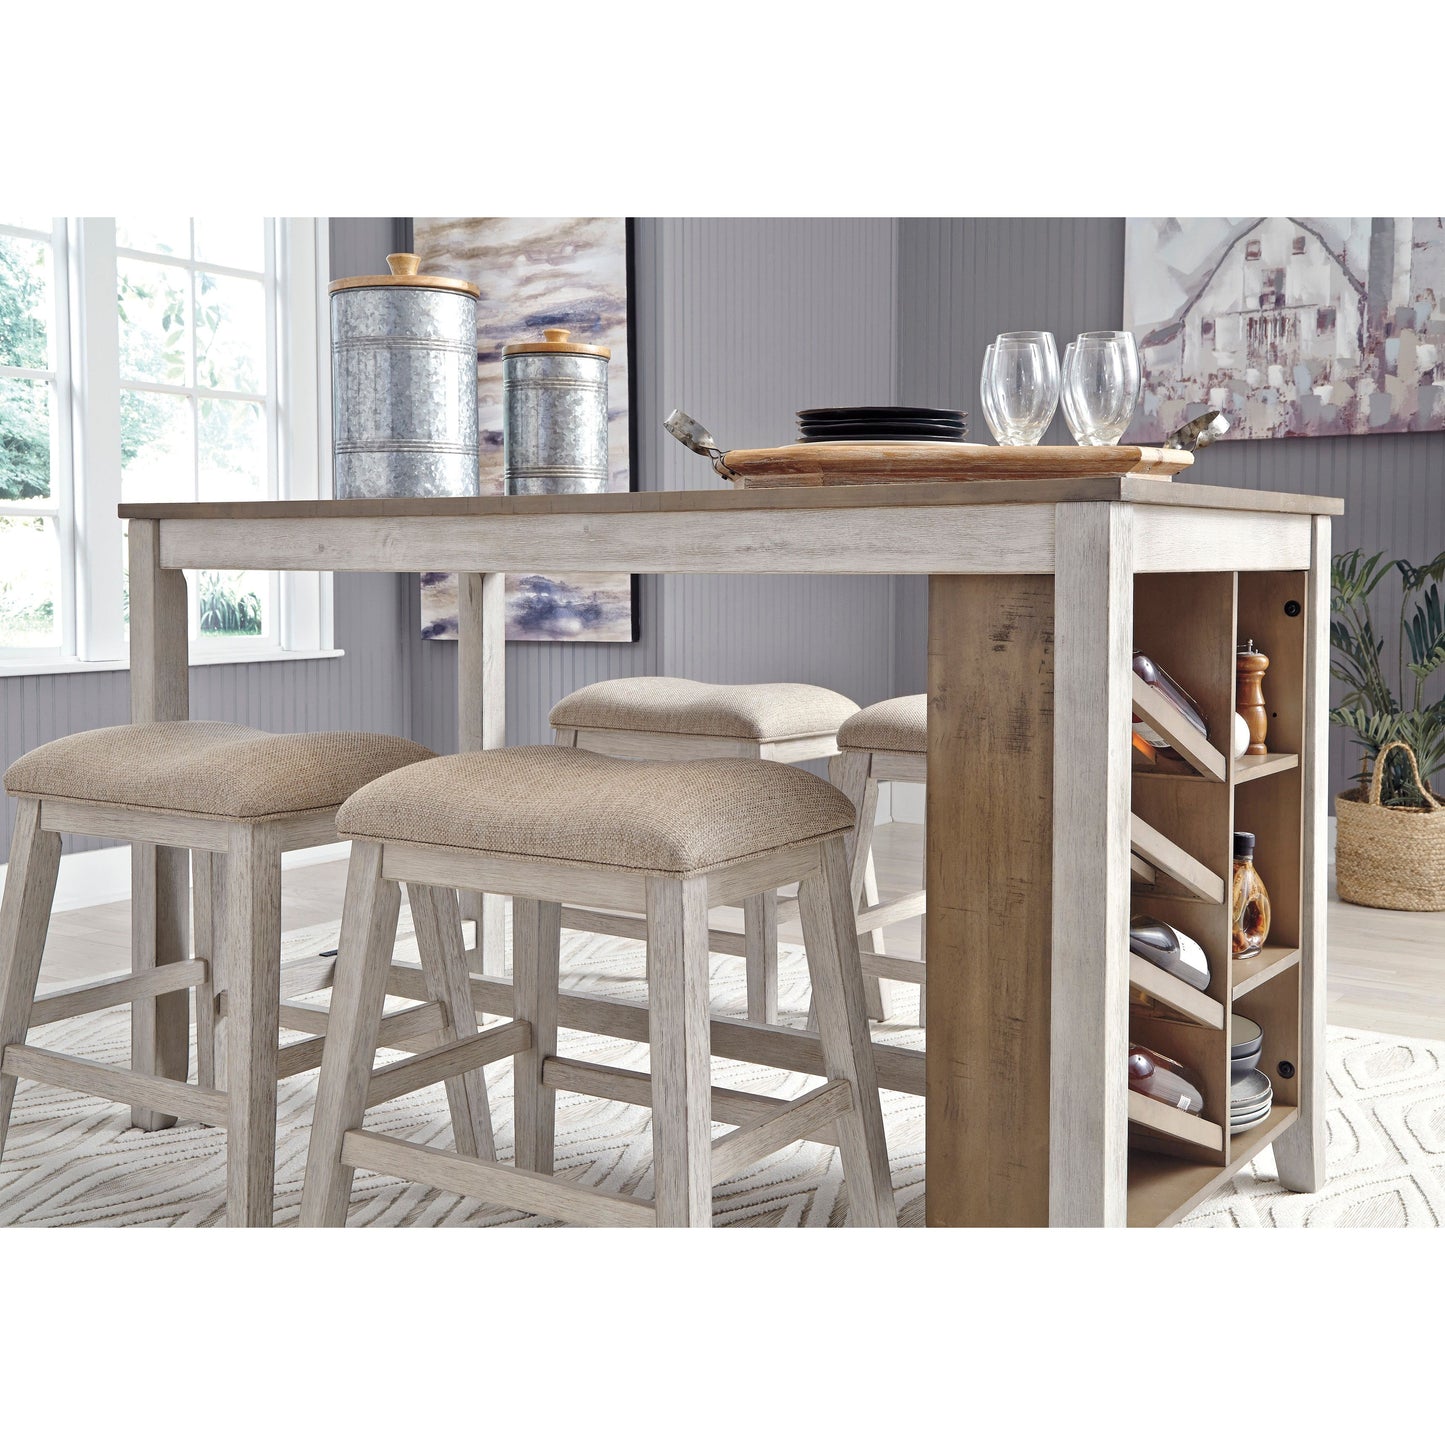 SKEMPTON COUNTER HEIGHT DINING TABLE WITH 4 COUNTER STOOLS